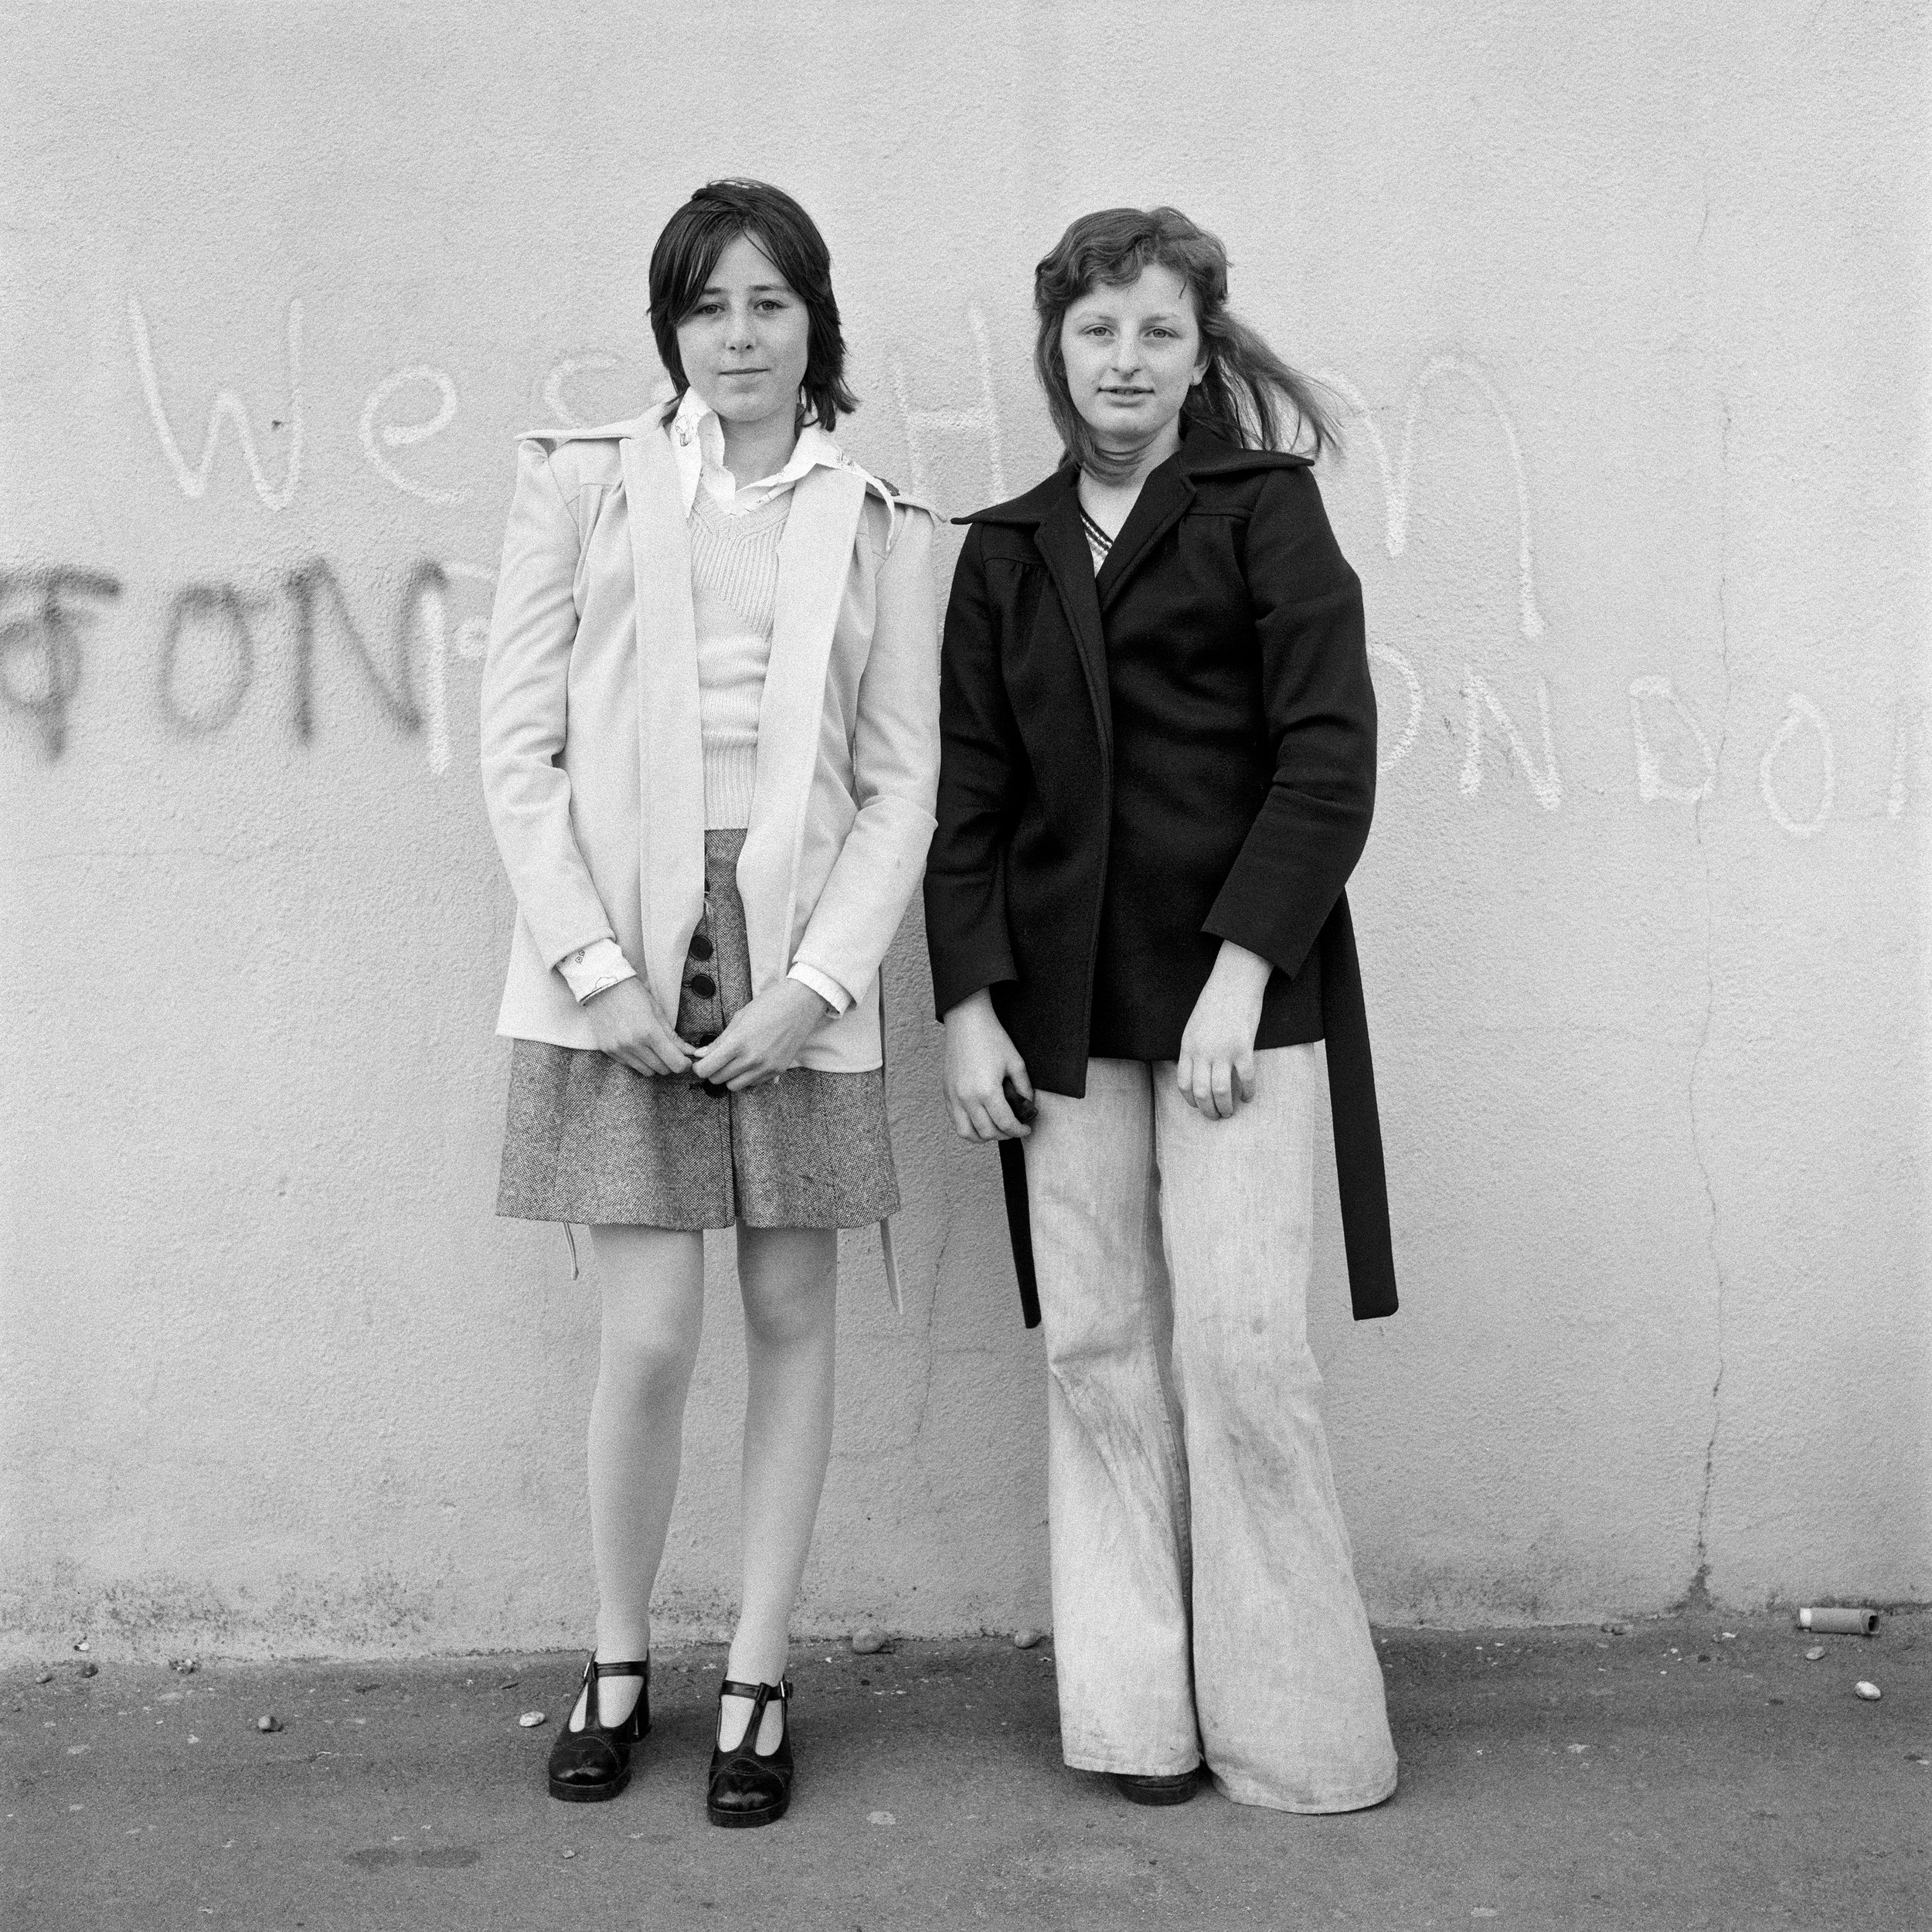  Double portrait from the Free Photographic Omnibus, Brighton, Sussex. May 1974 ©Daniel Meadows 